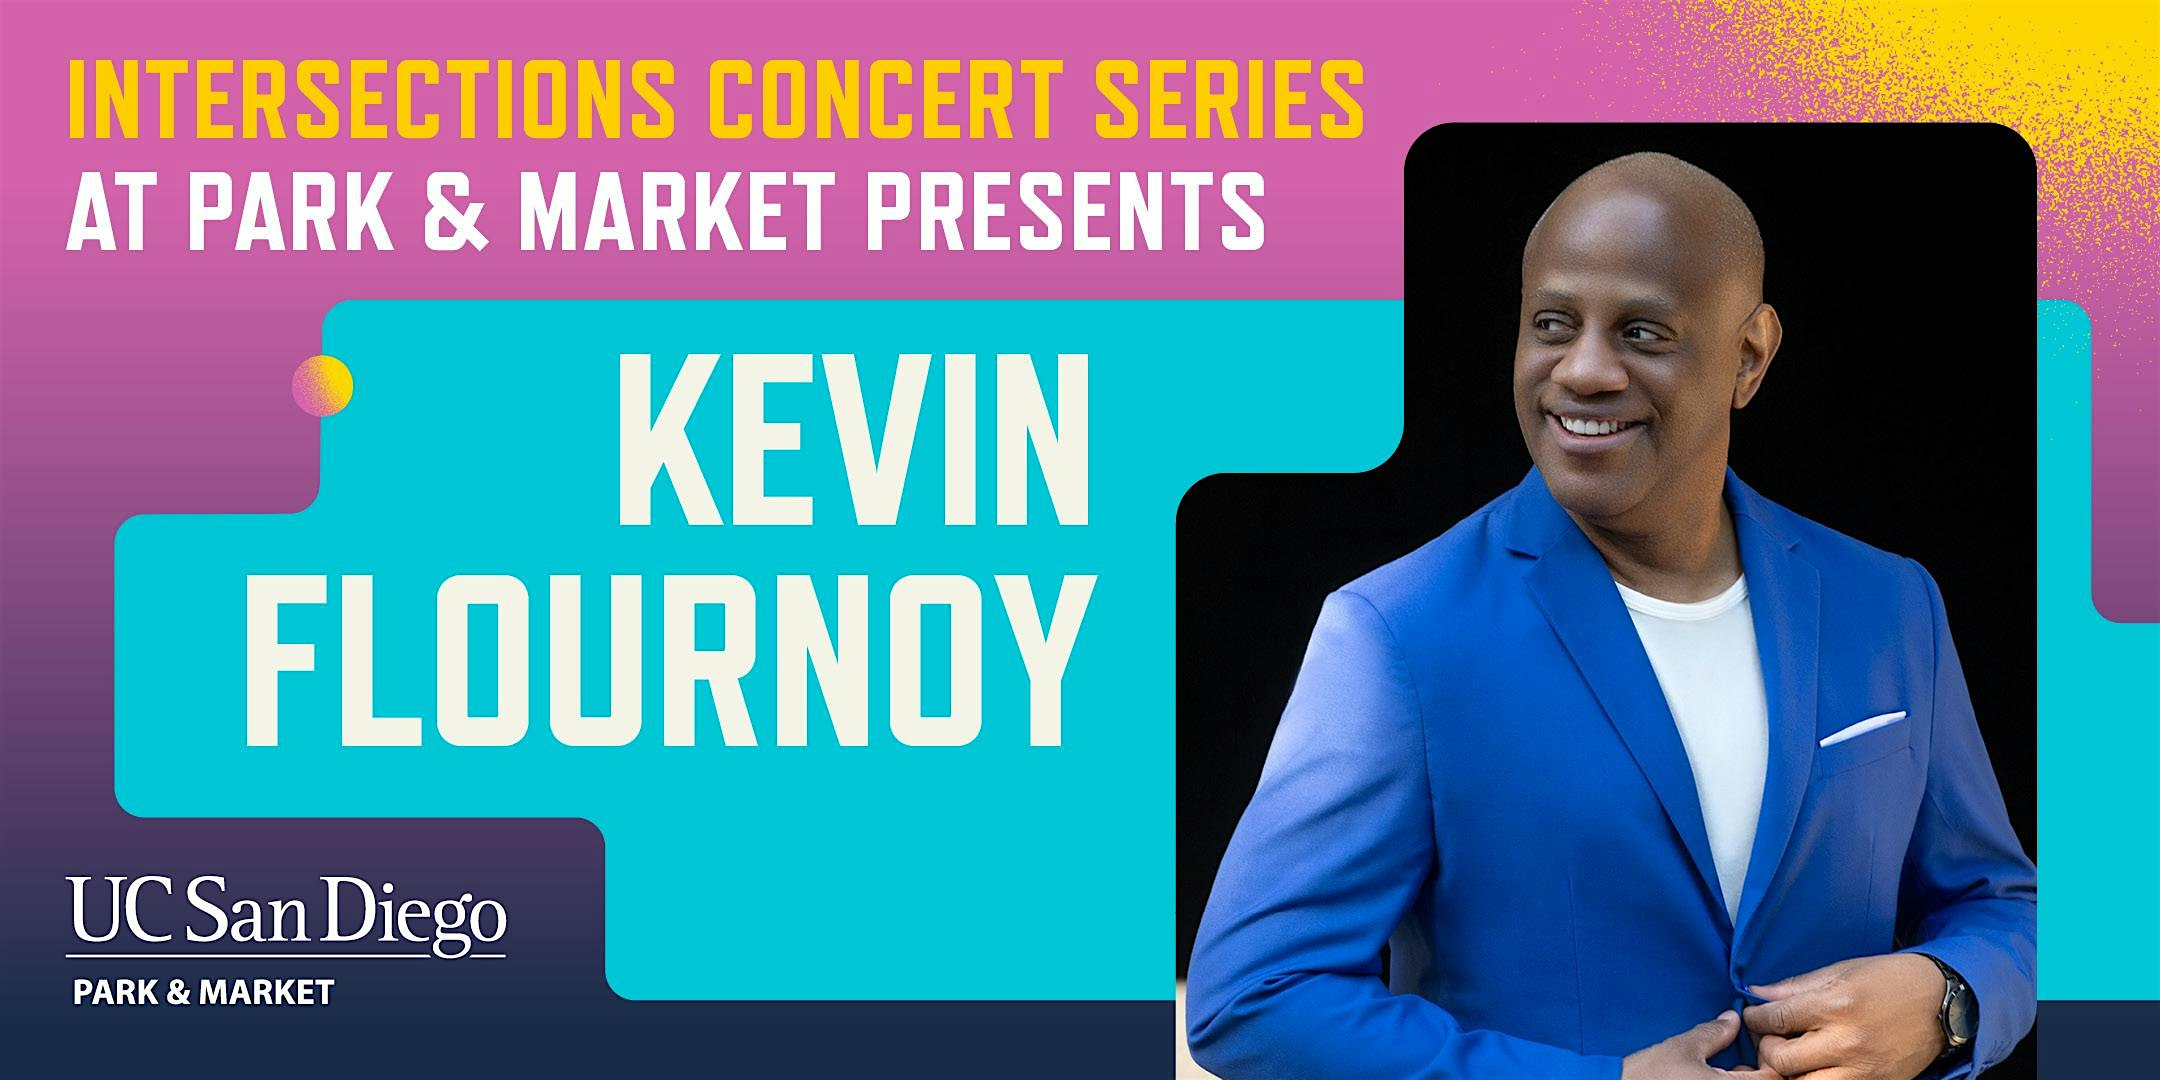 Intersections Concert Series Presents Kevin Flournoy